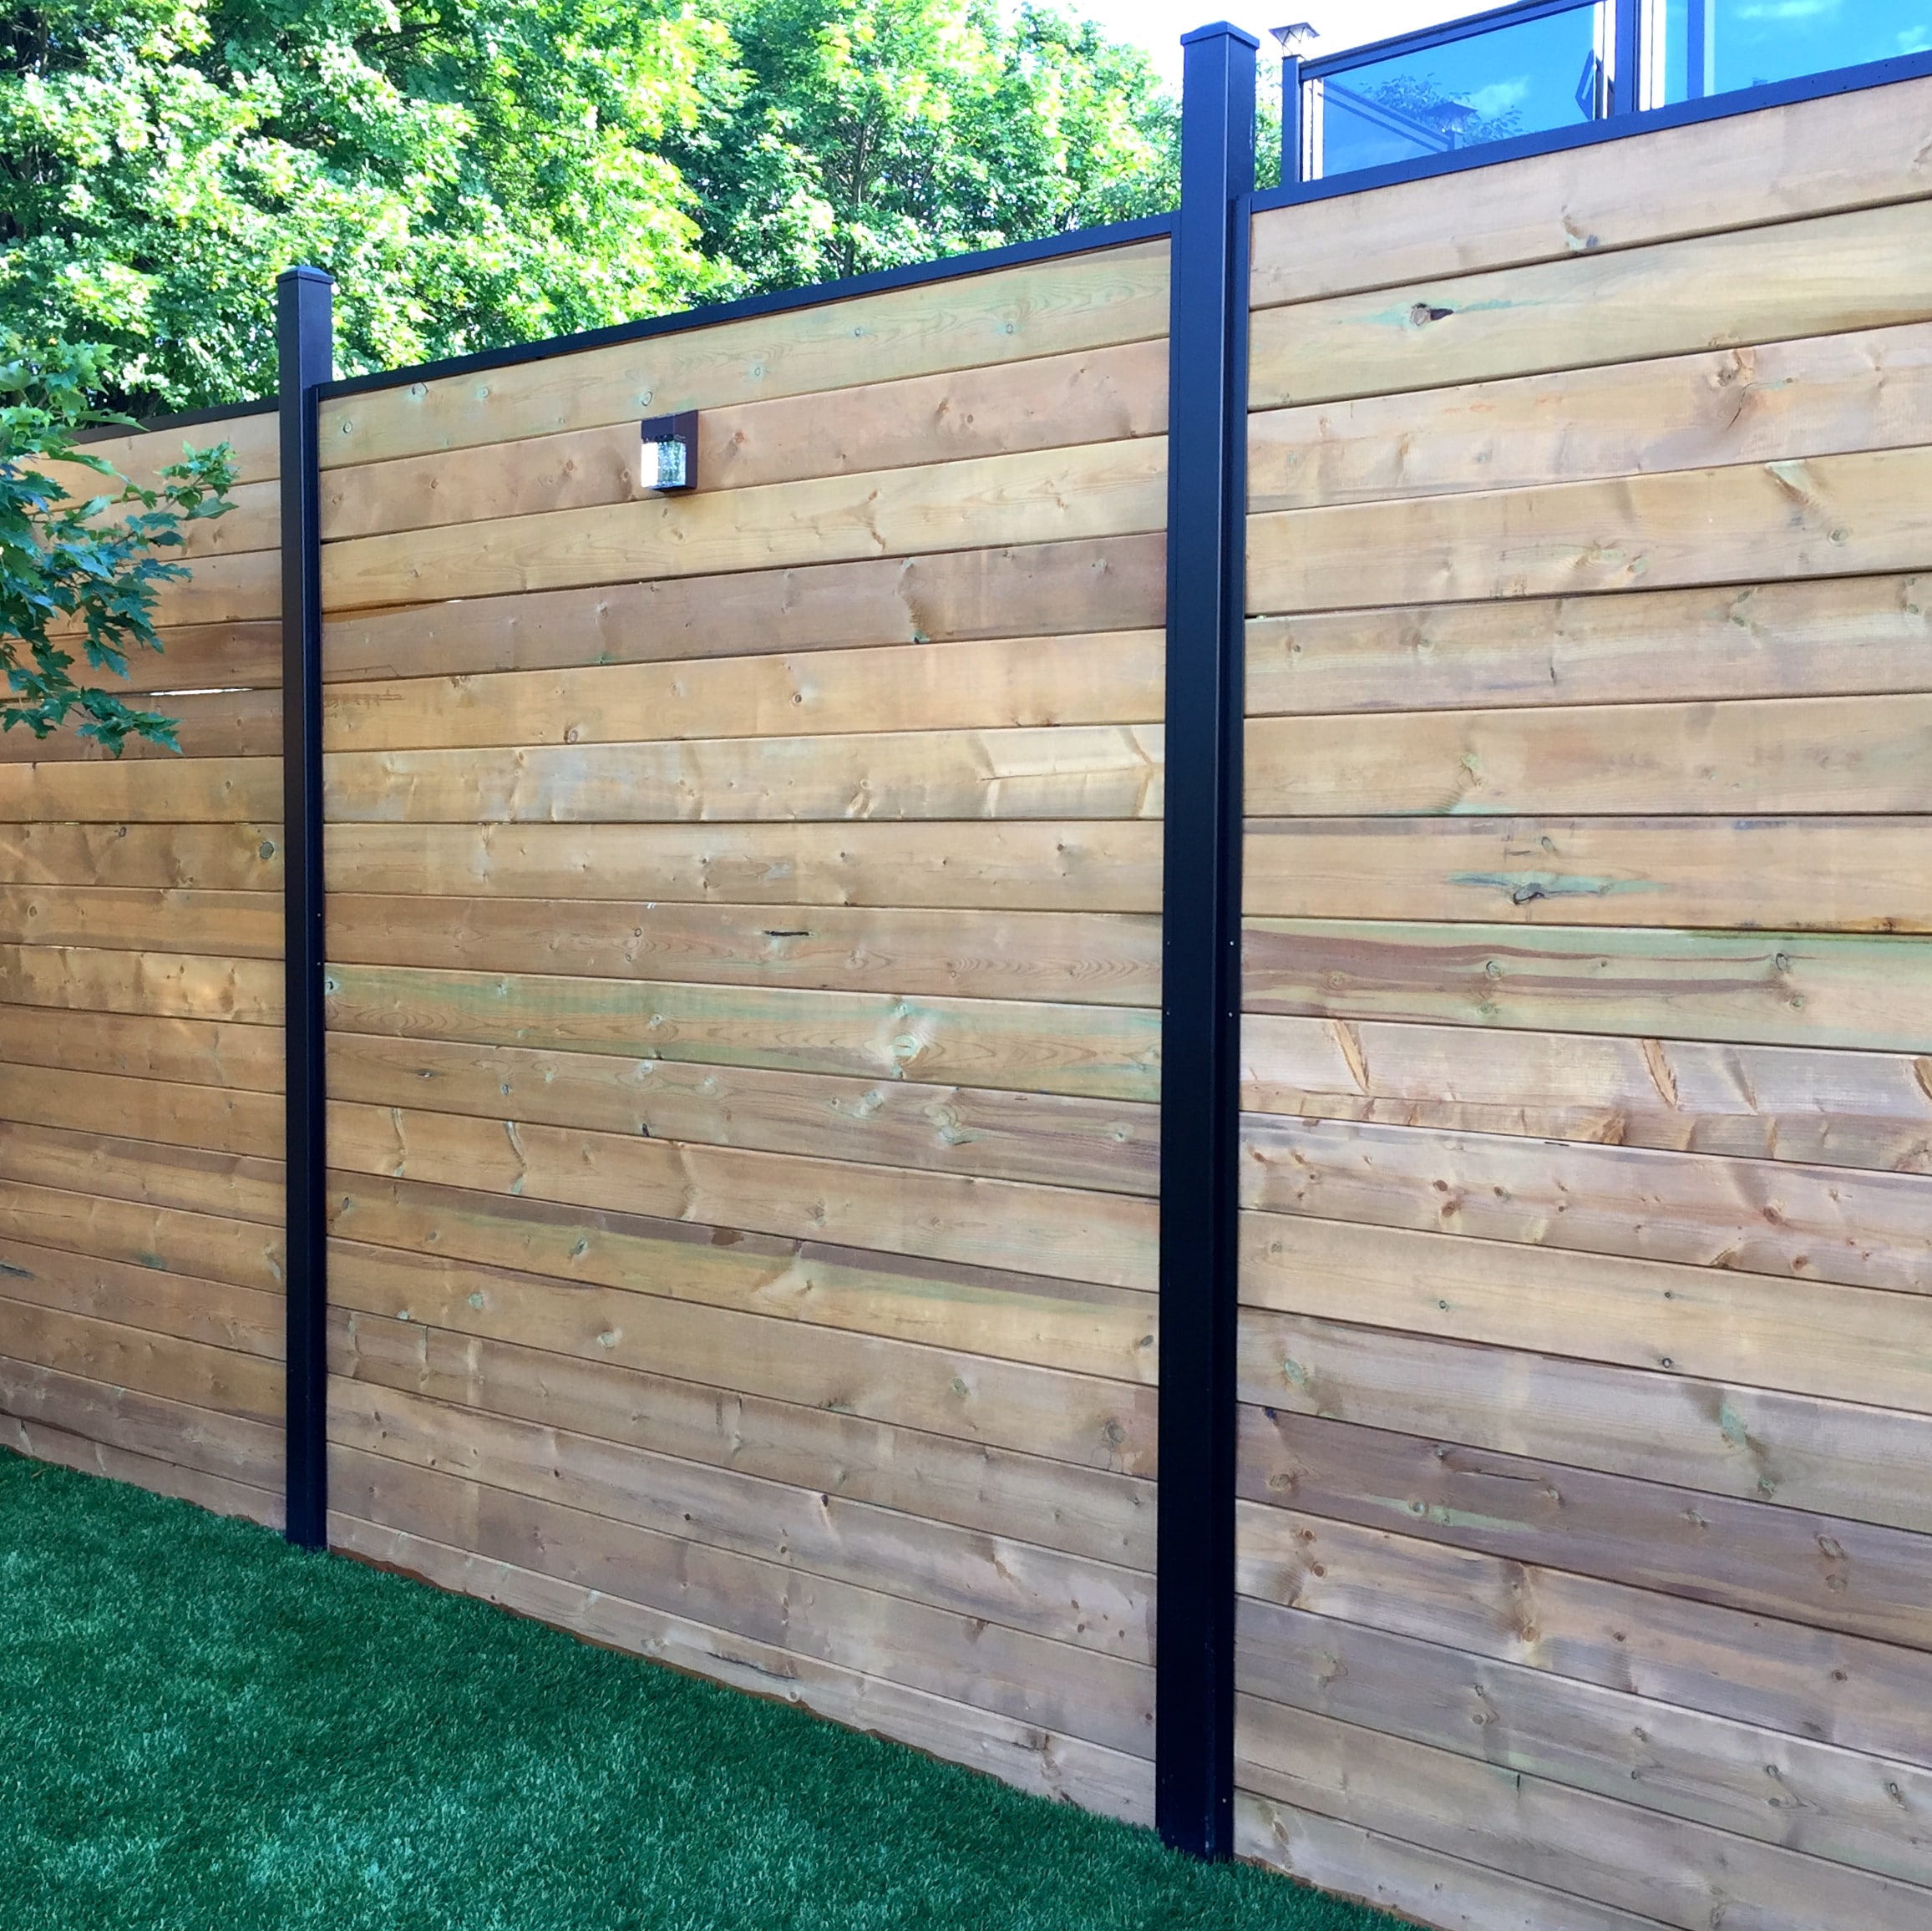 Slipfence 6-ft H x 1-1/2-in W Black Aluminum Privacy Fence Channel Kit in the Metal Fencing department at Lowes